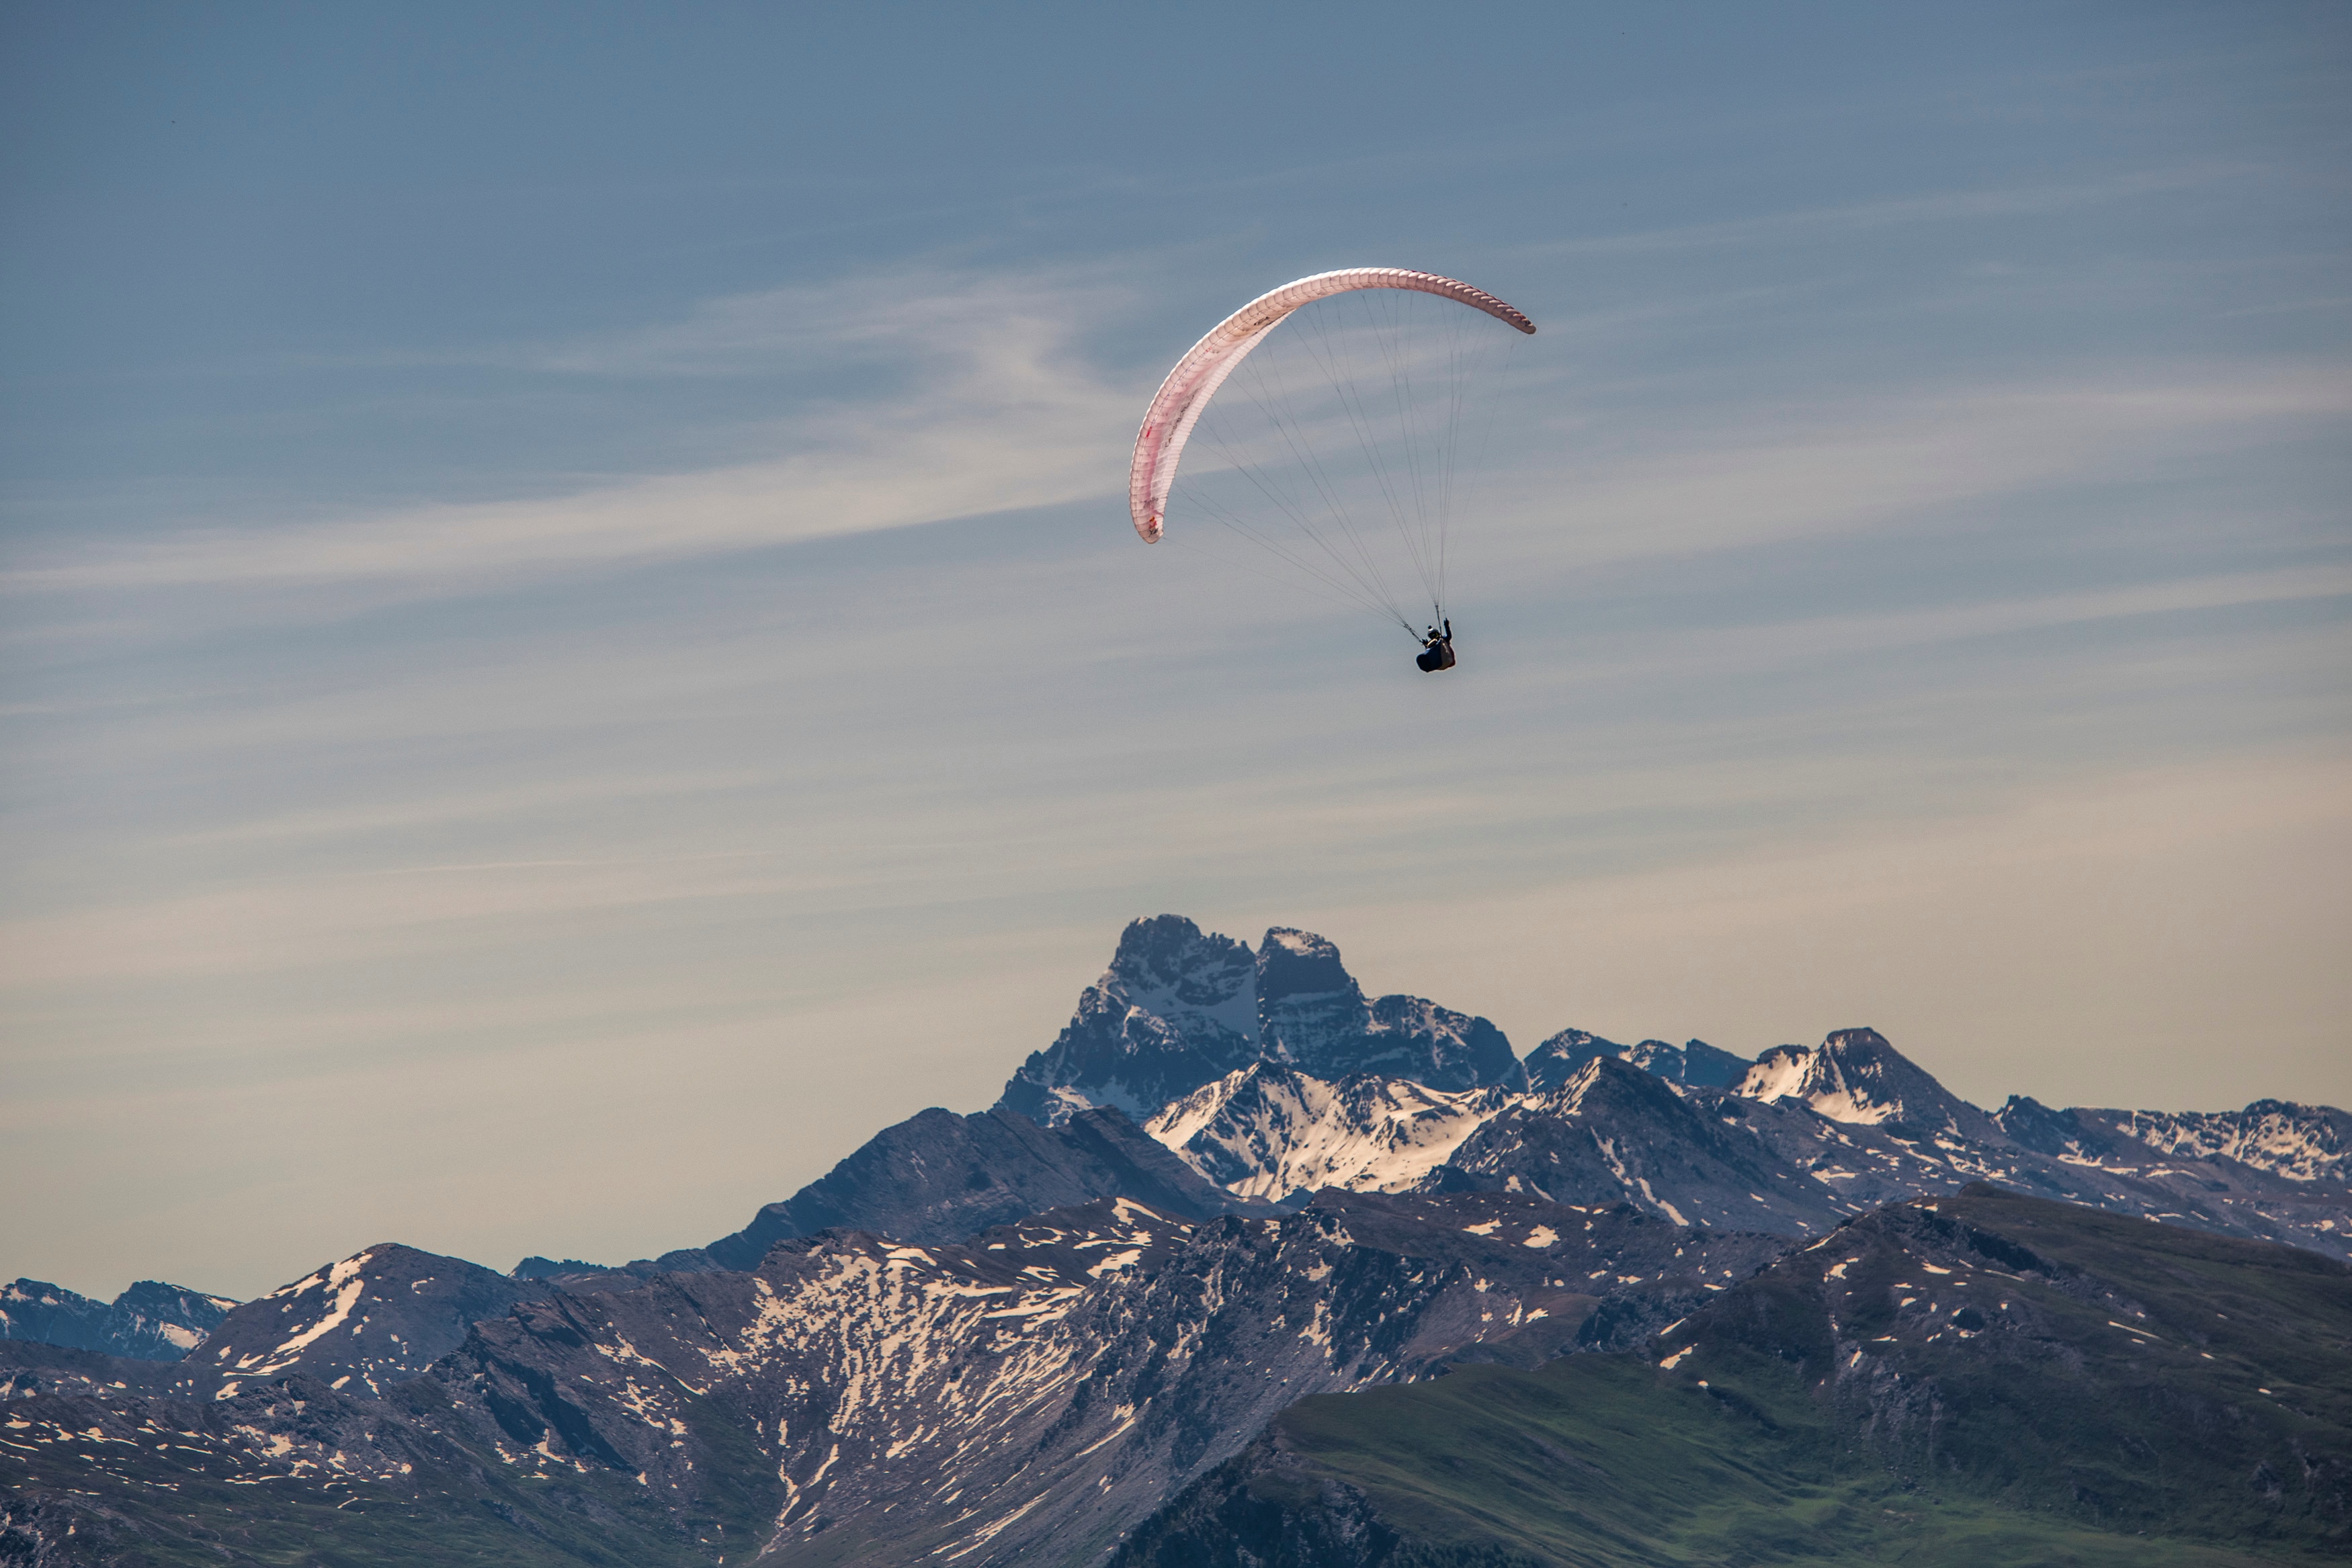 Maxime Pinot (FRA2) races during the Red Bull X-Alps above Brunissard, France on June 24, 2019.